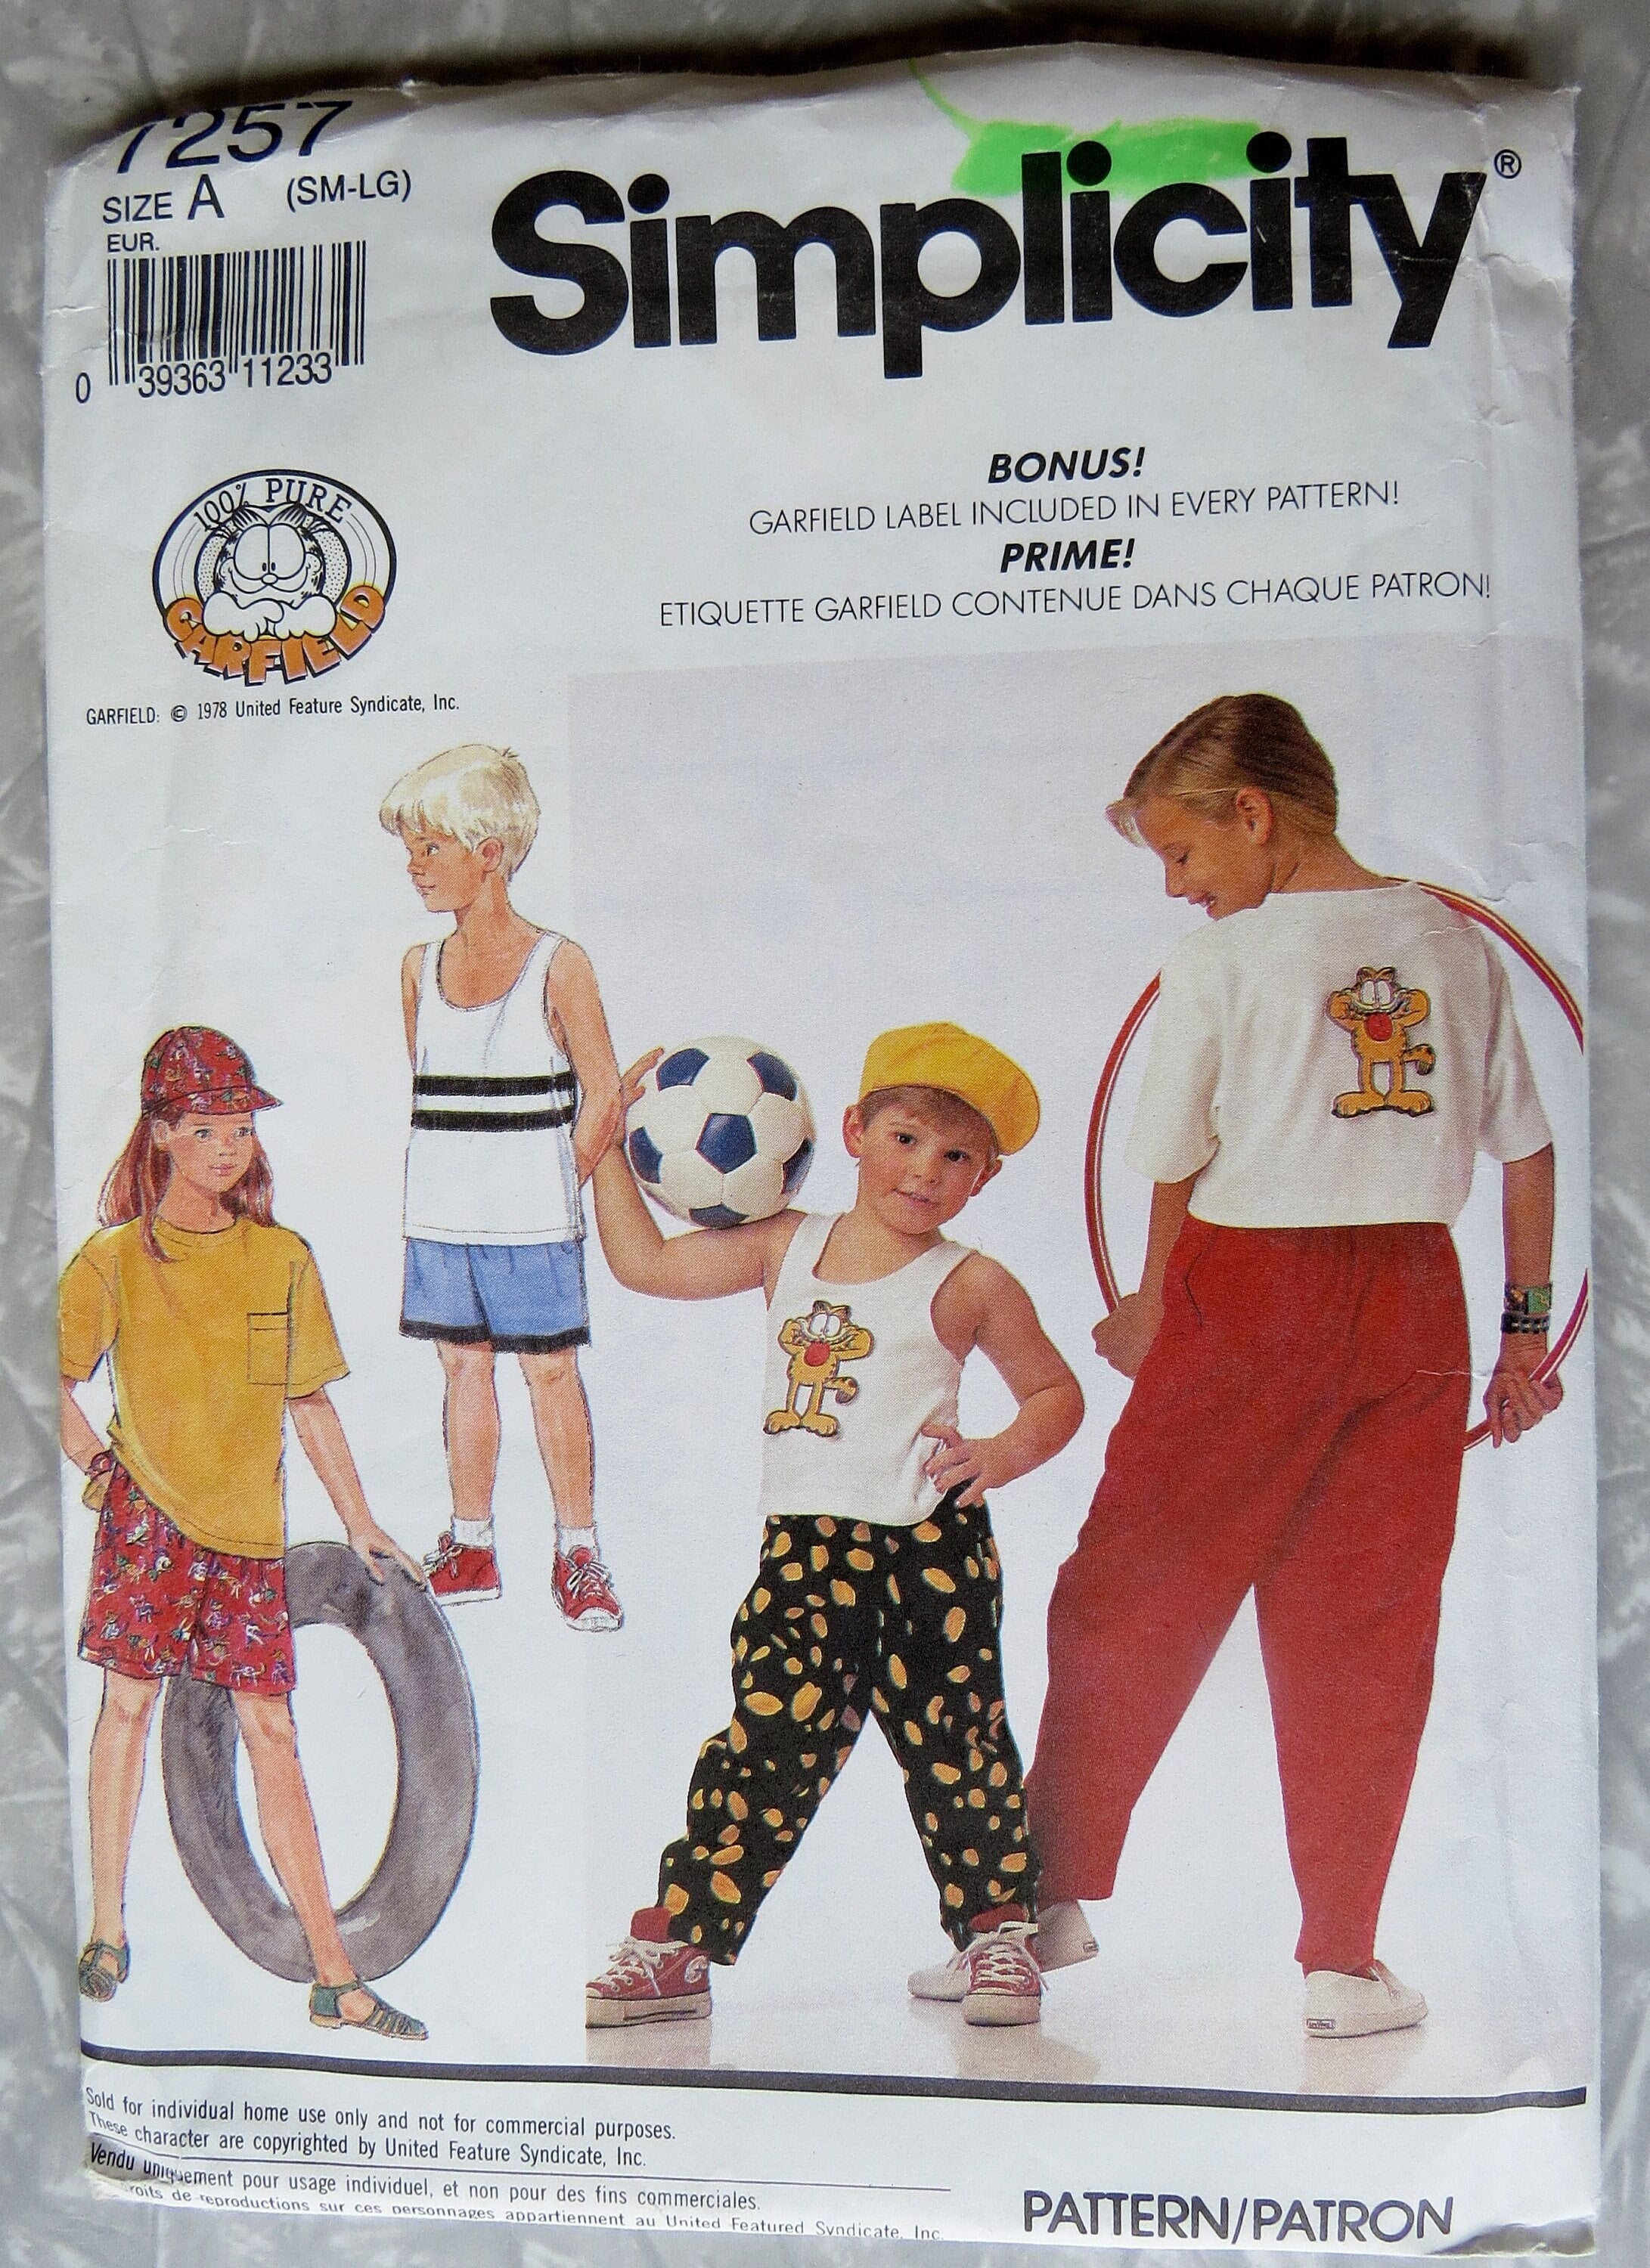 Simplicity 7257 Pull-on Pants Shorts Hat Knit Tops in 2 Lengths